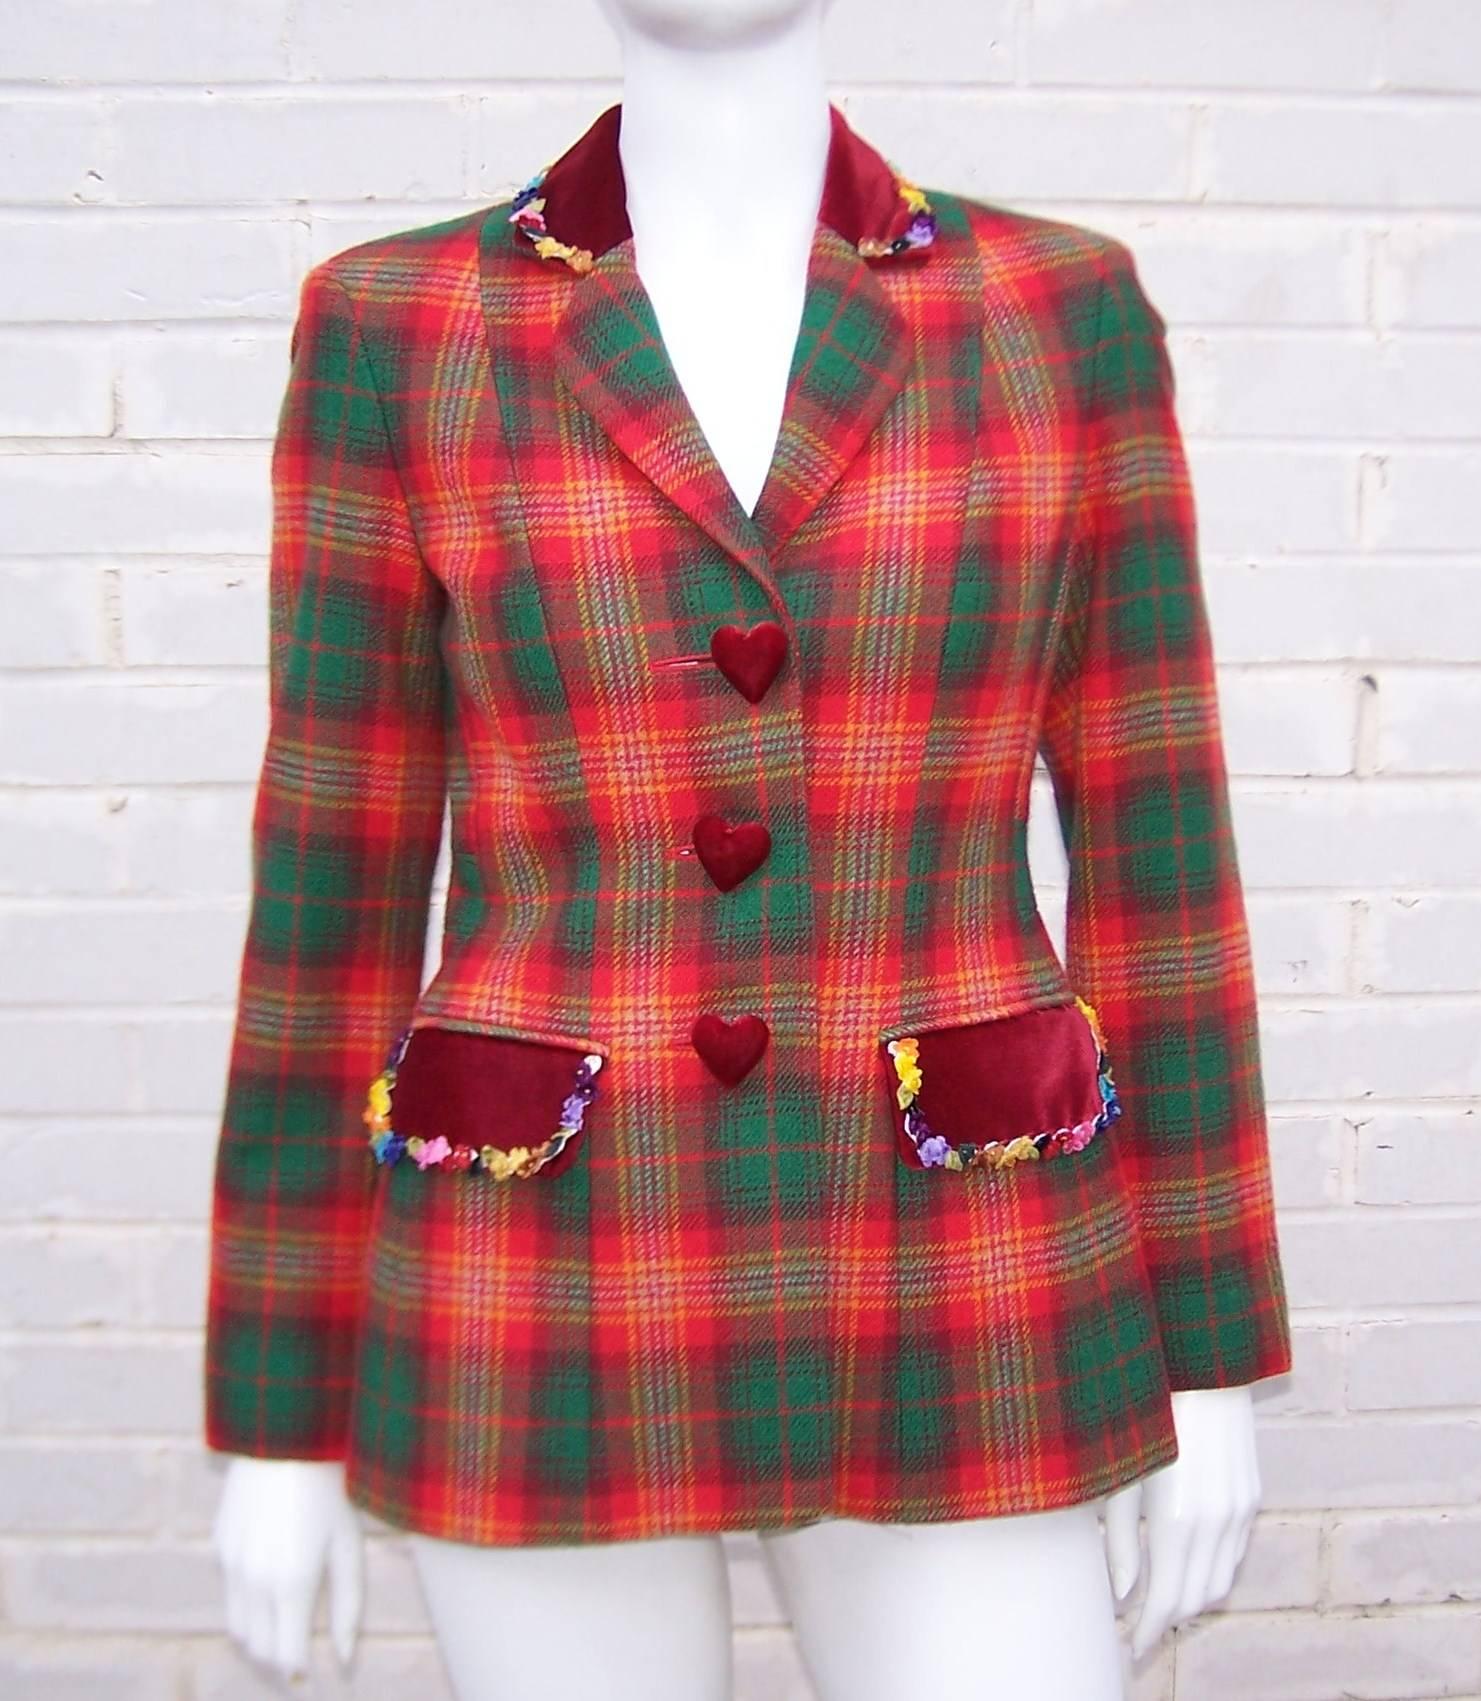 Adorable 1990's Moschino Plaid Skirt Suit With Velvet Heart Buttons 1